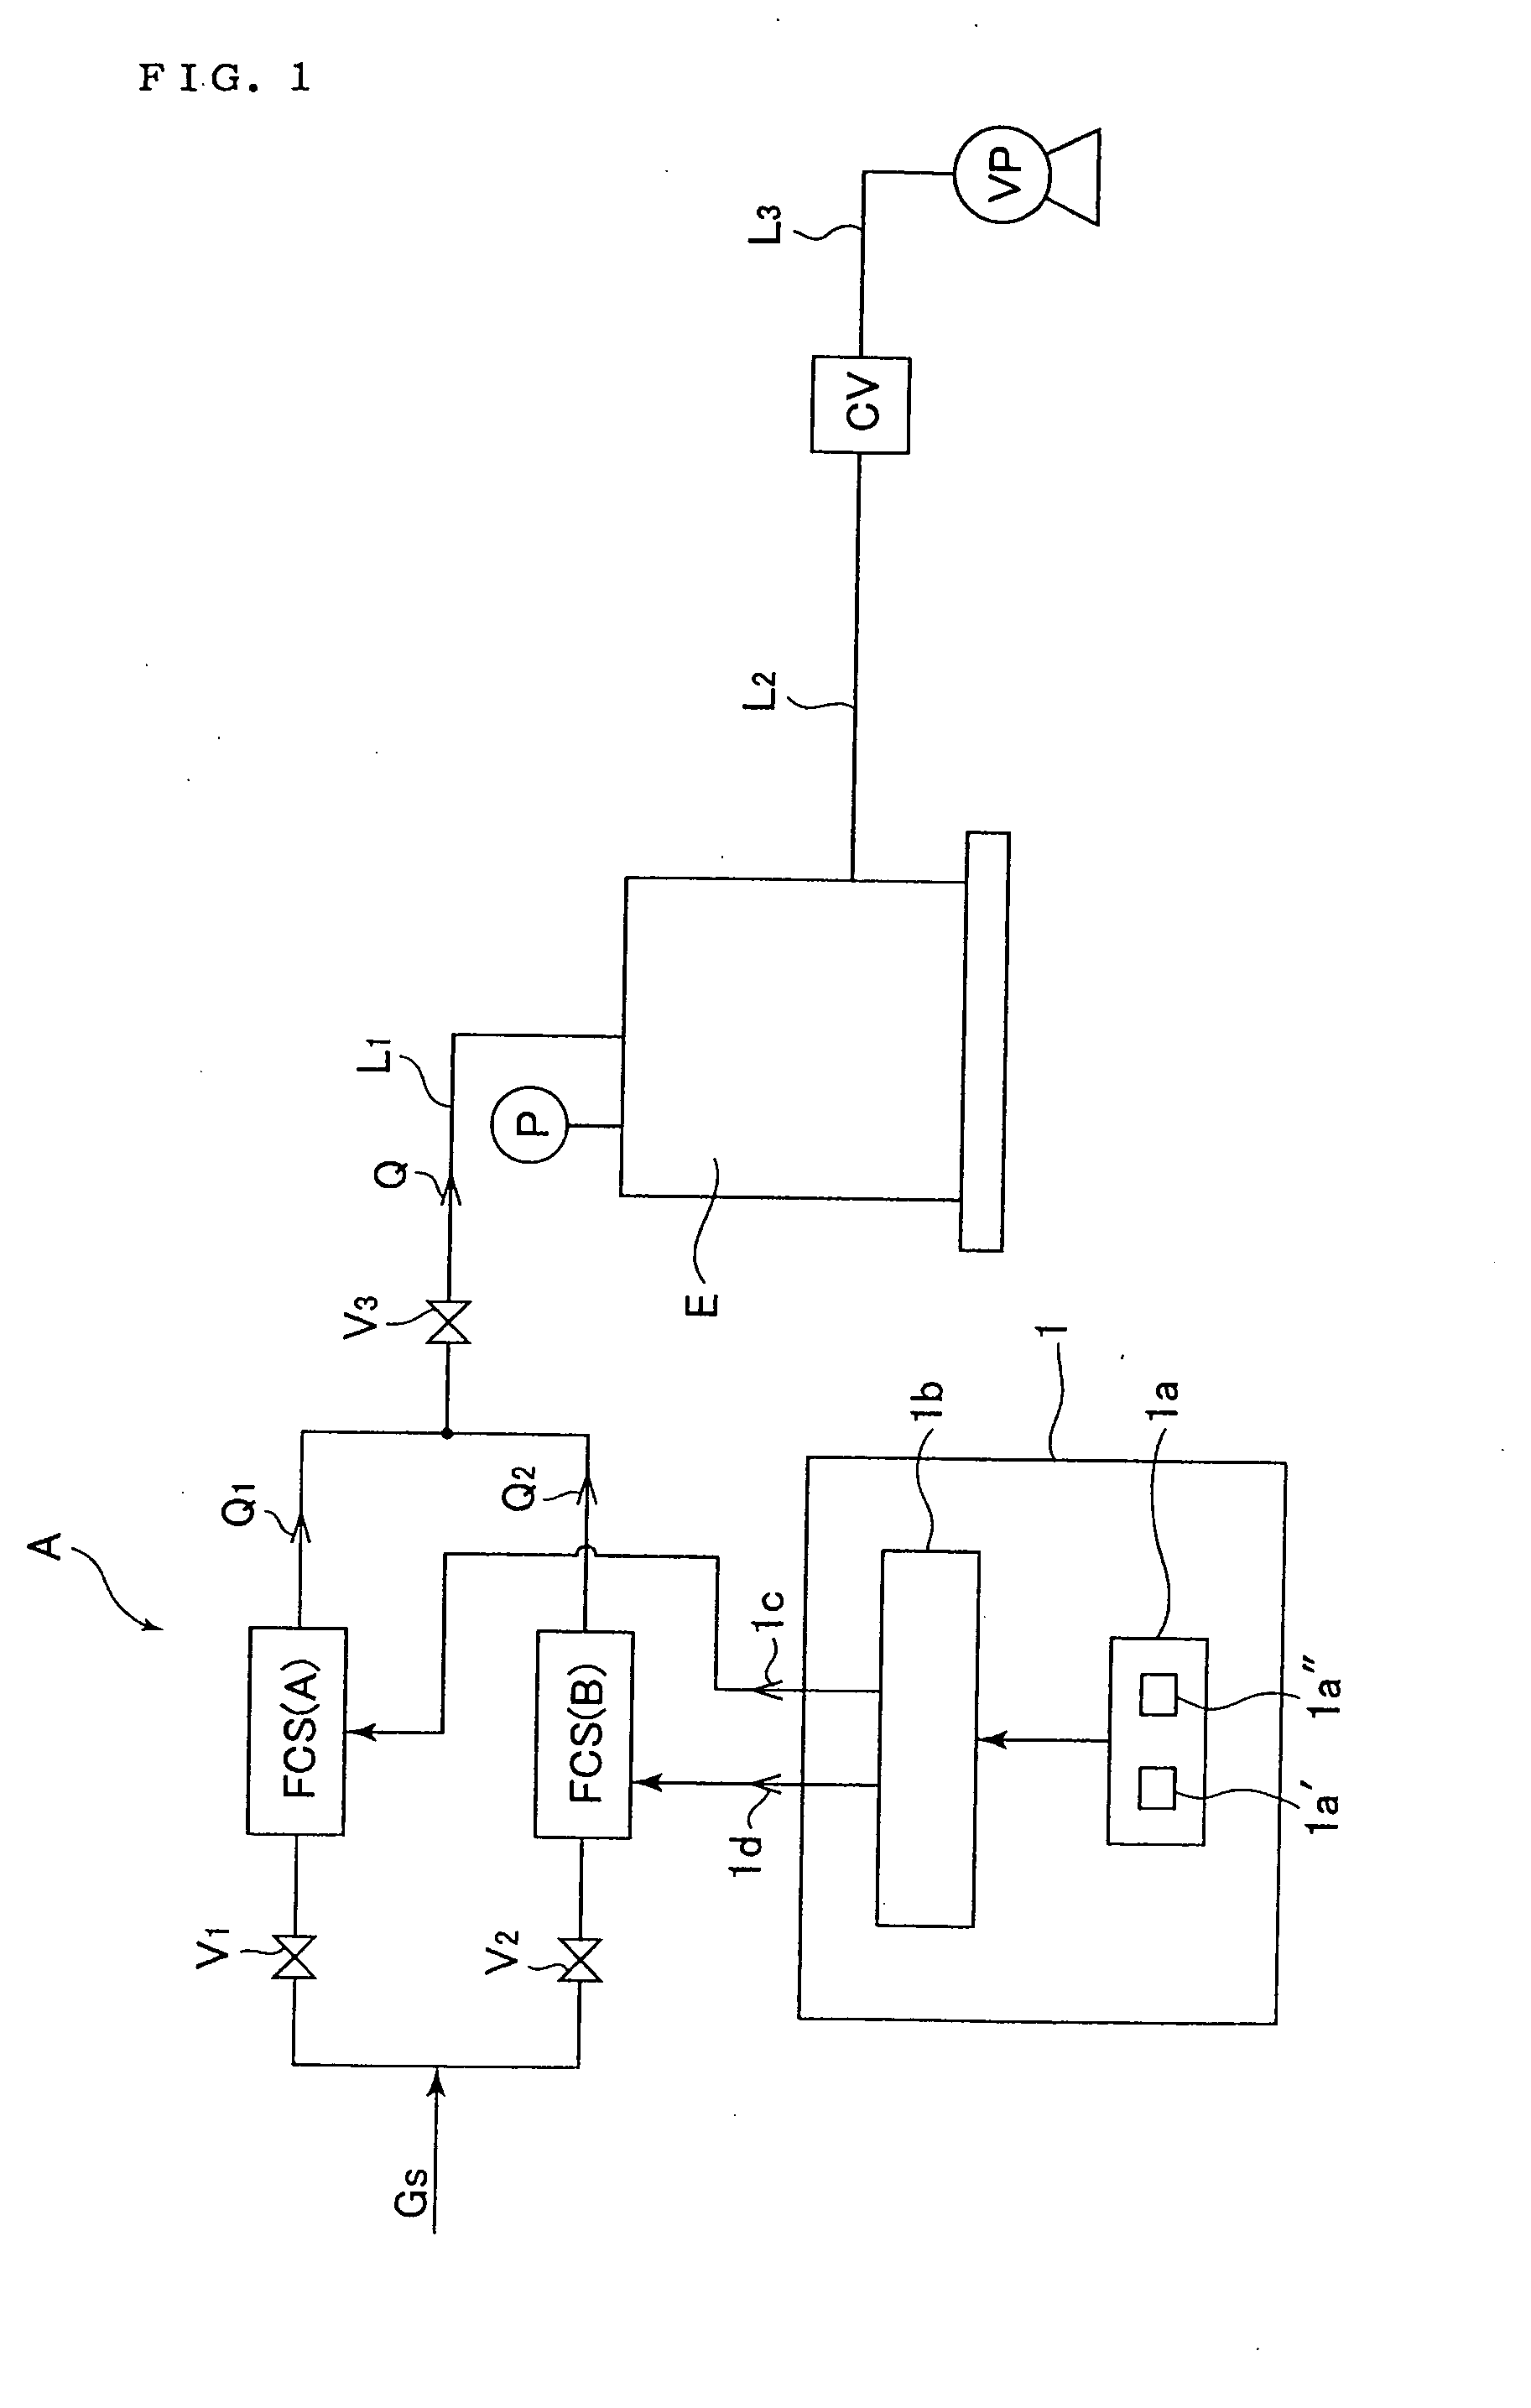 Gas Supply Facility Of A Chamber And A Fethod For An Internal Pressure Control Of The Chamber For Which The Facility Is Employed